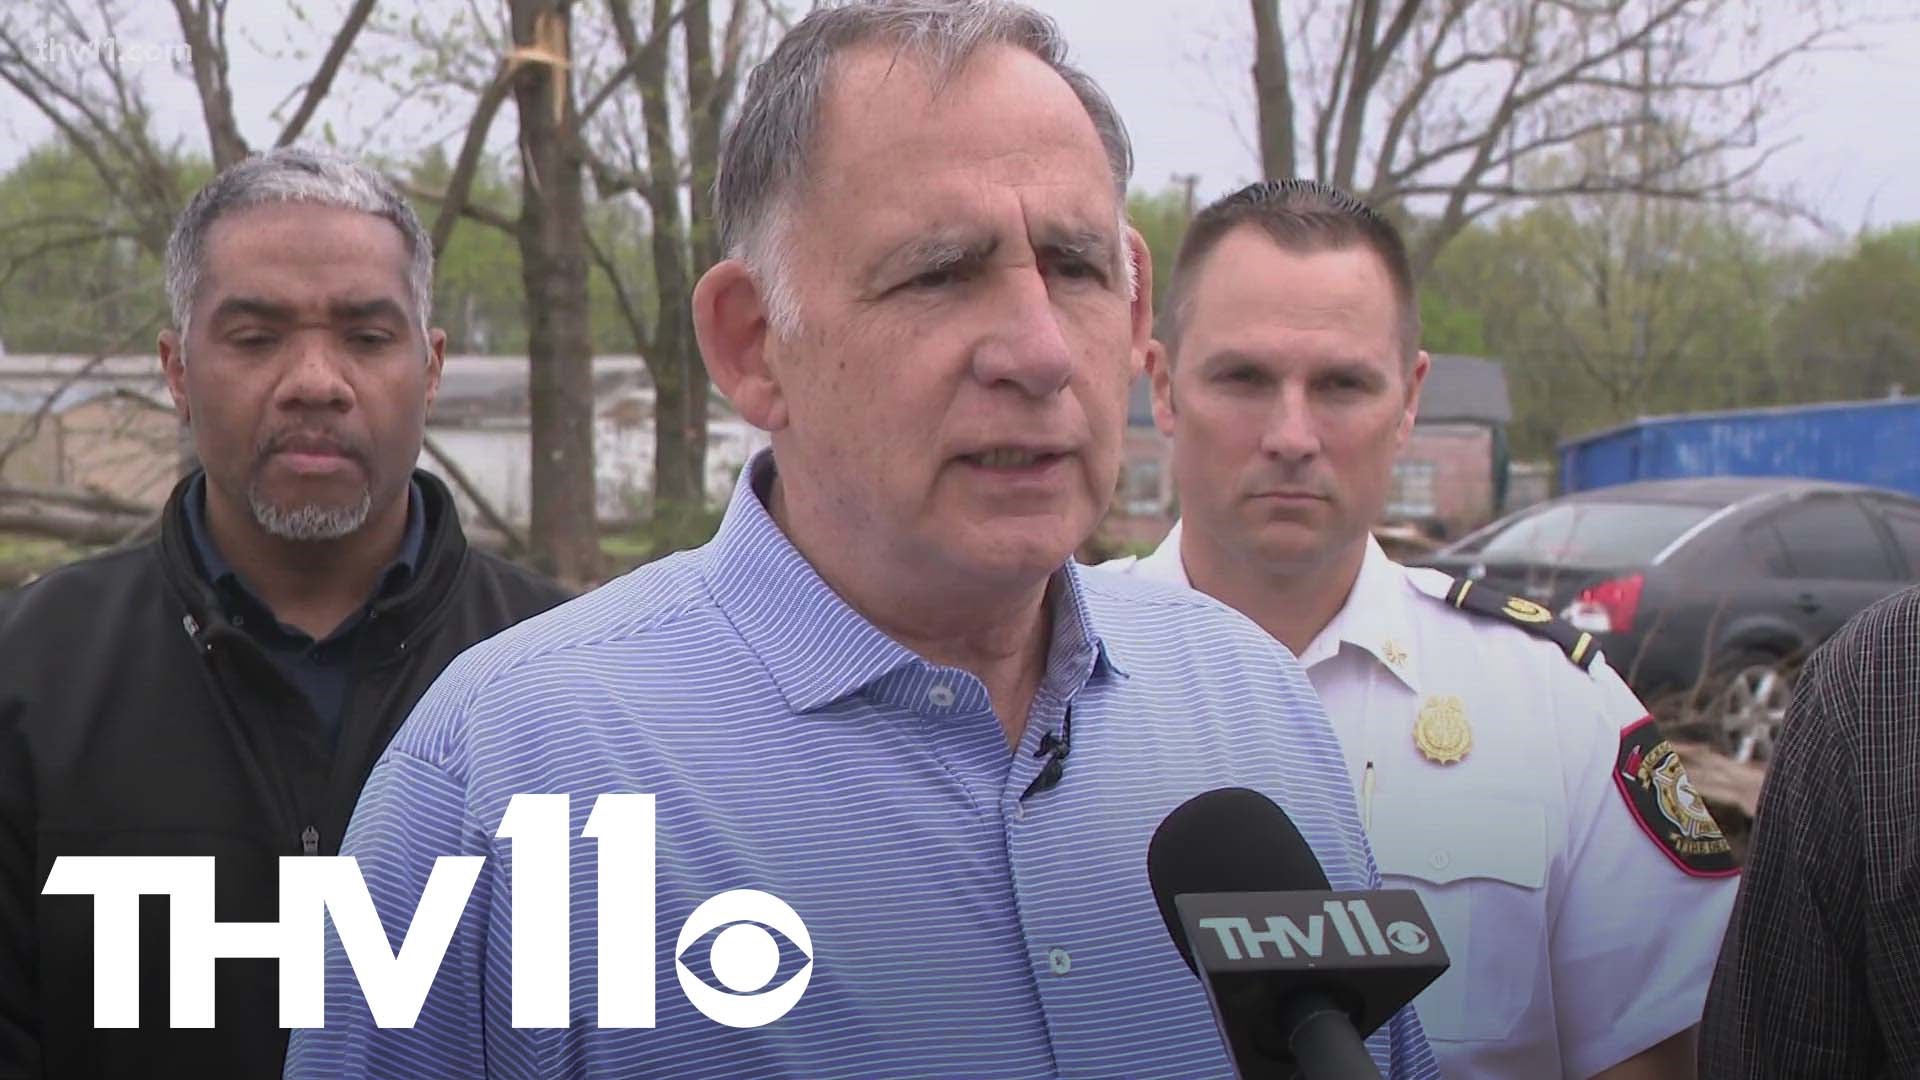 After last week's tornadoes left the city with major damage, Sen. John Boozman surveyed the city where recovery efforts are continuing.